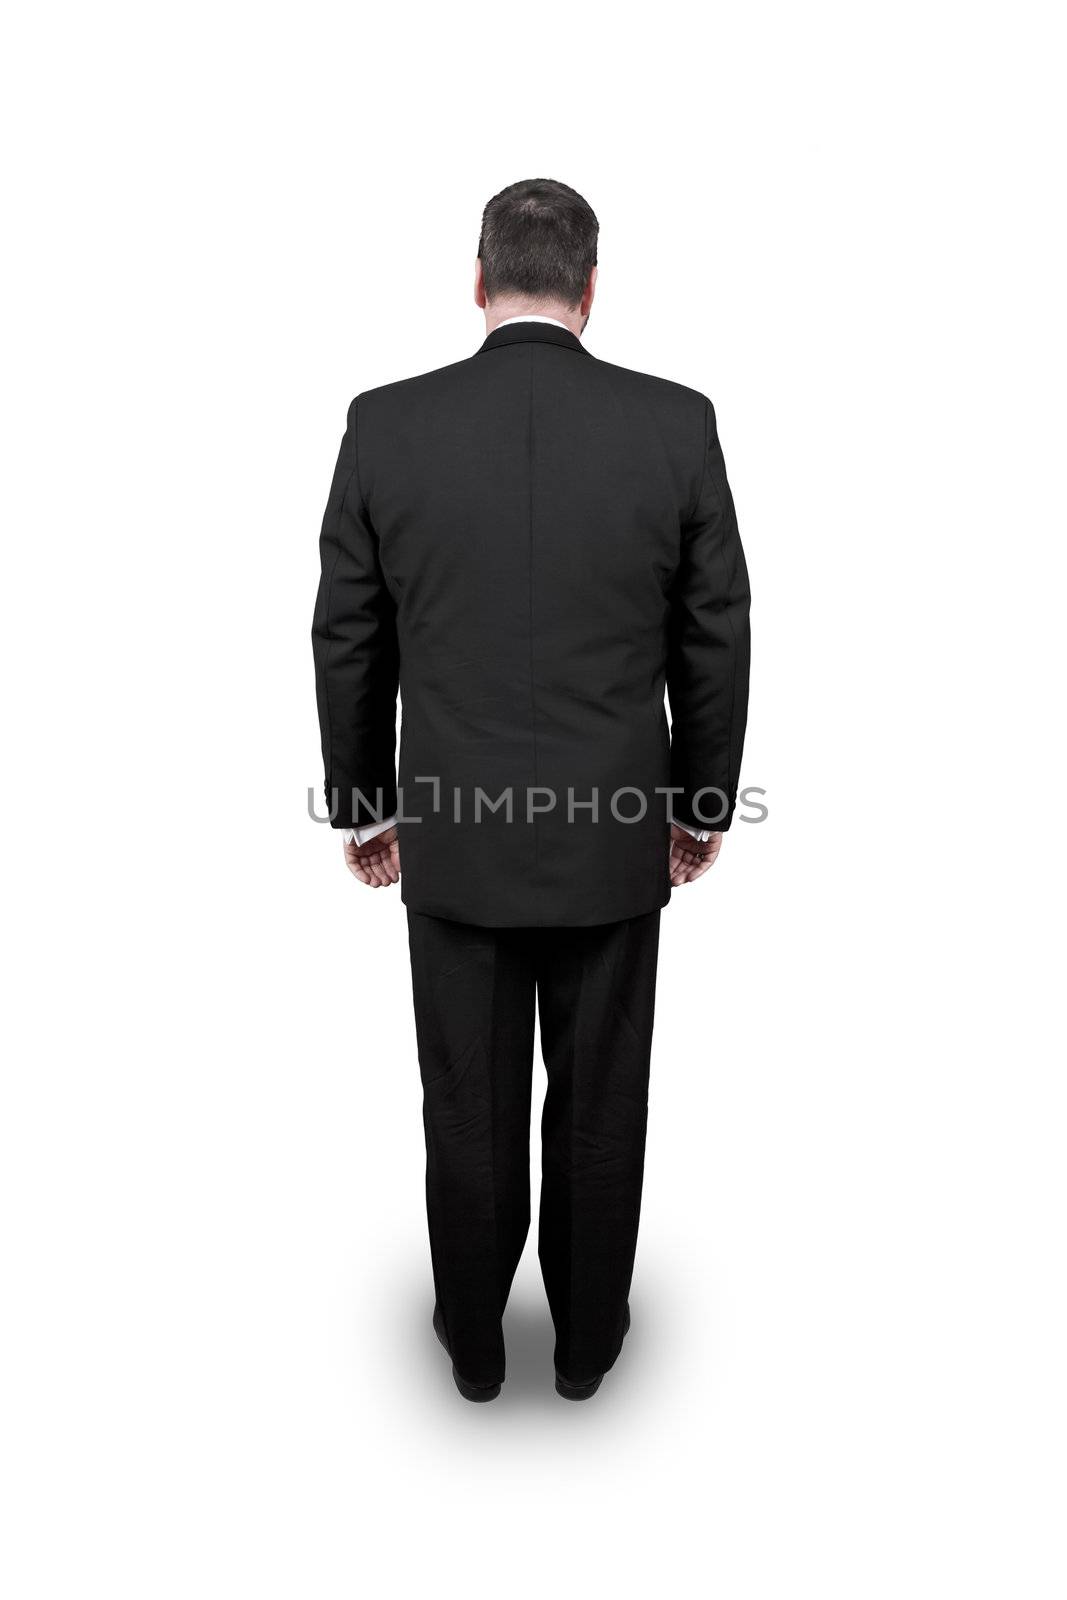 An image of a man in a black suit